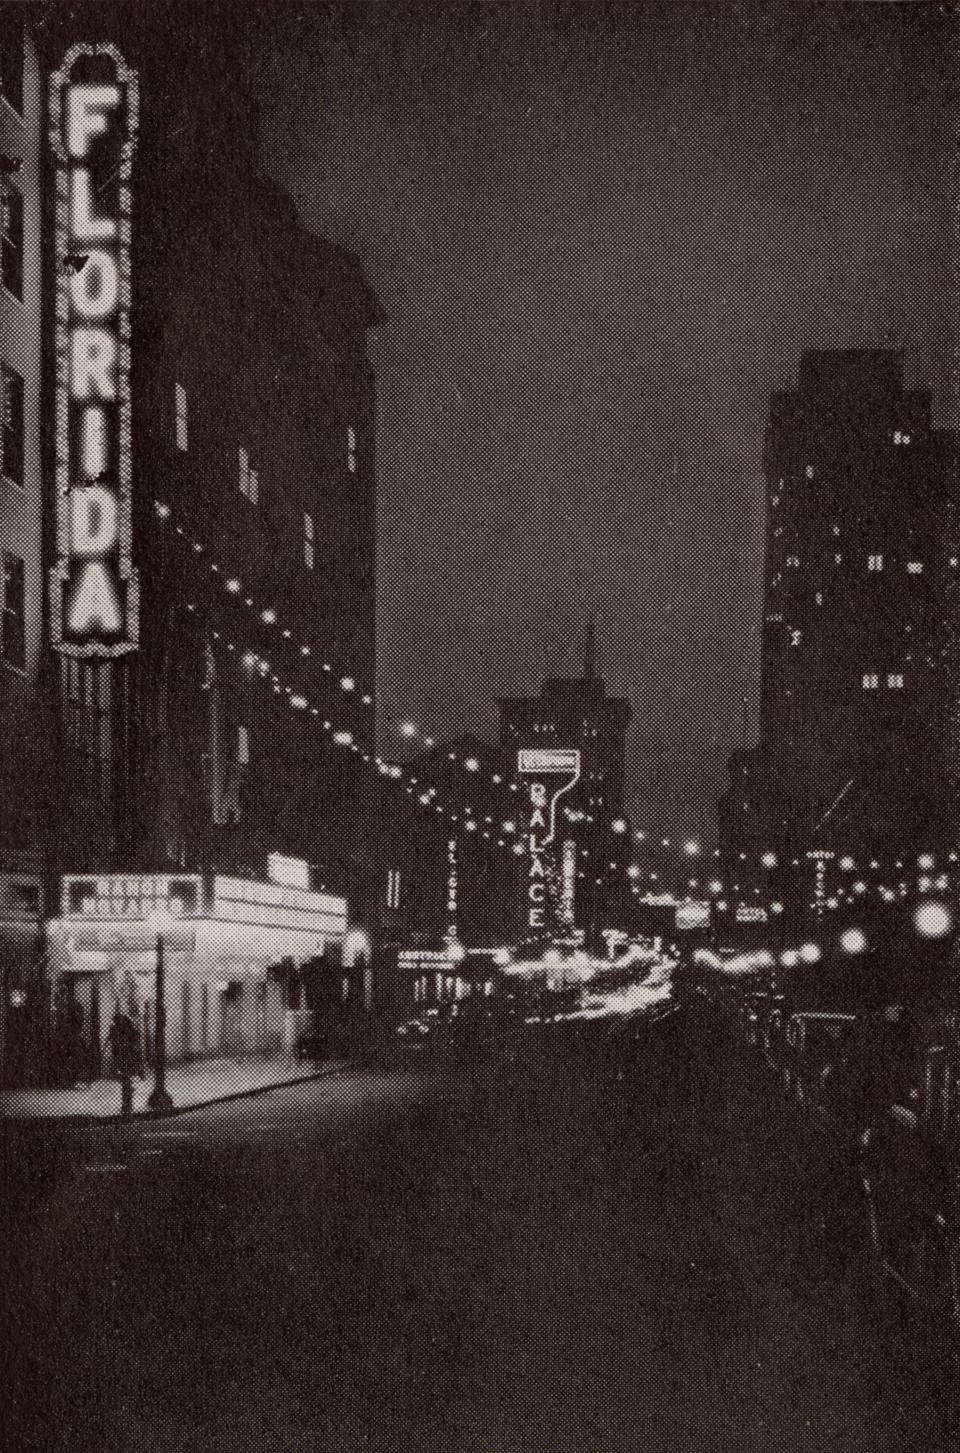 Long-range plans call for the return of the Florida Theatre's vertical "blade" sign, which was on the building when it was one of nine theaters in downtown Jacksonville.